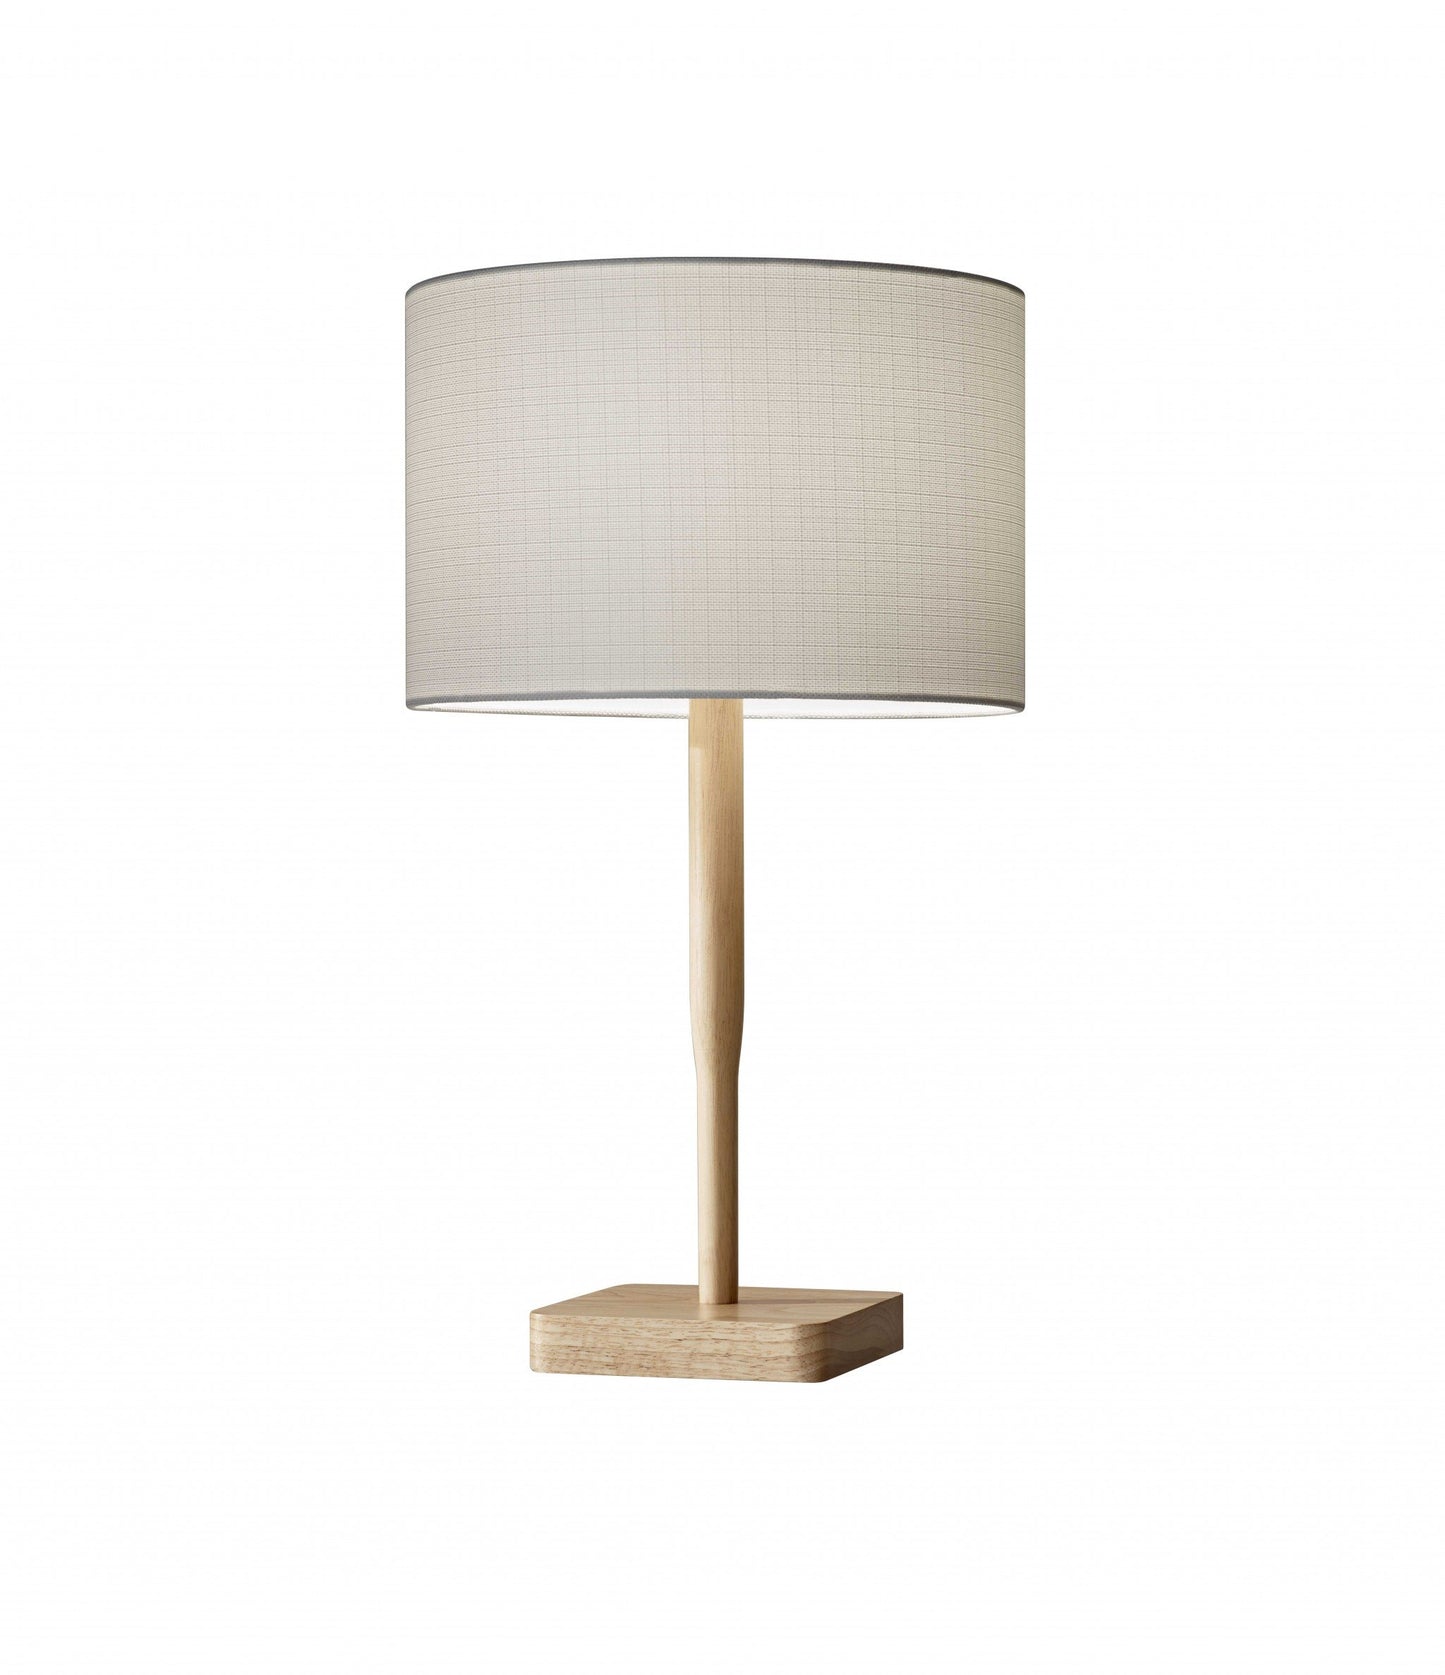 Classic Natural Wooden Table Lamp